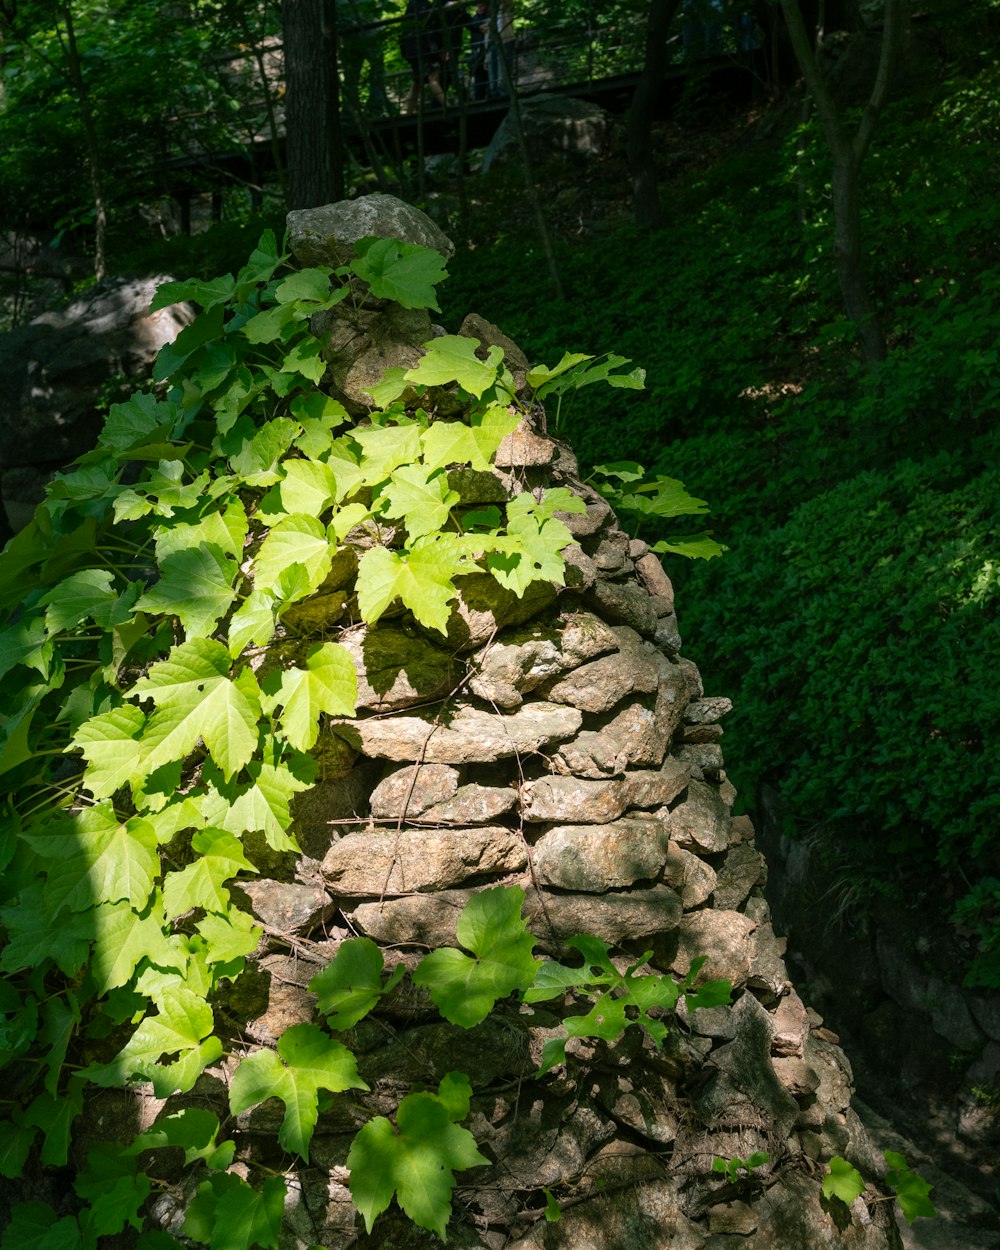 a stone wall with green leaves growing on it